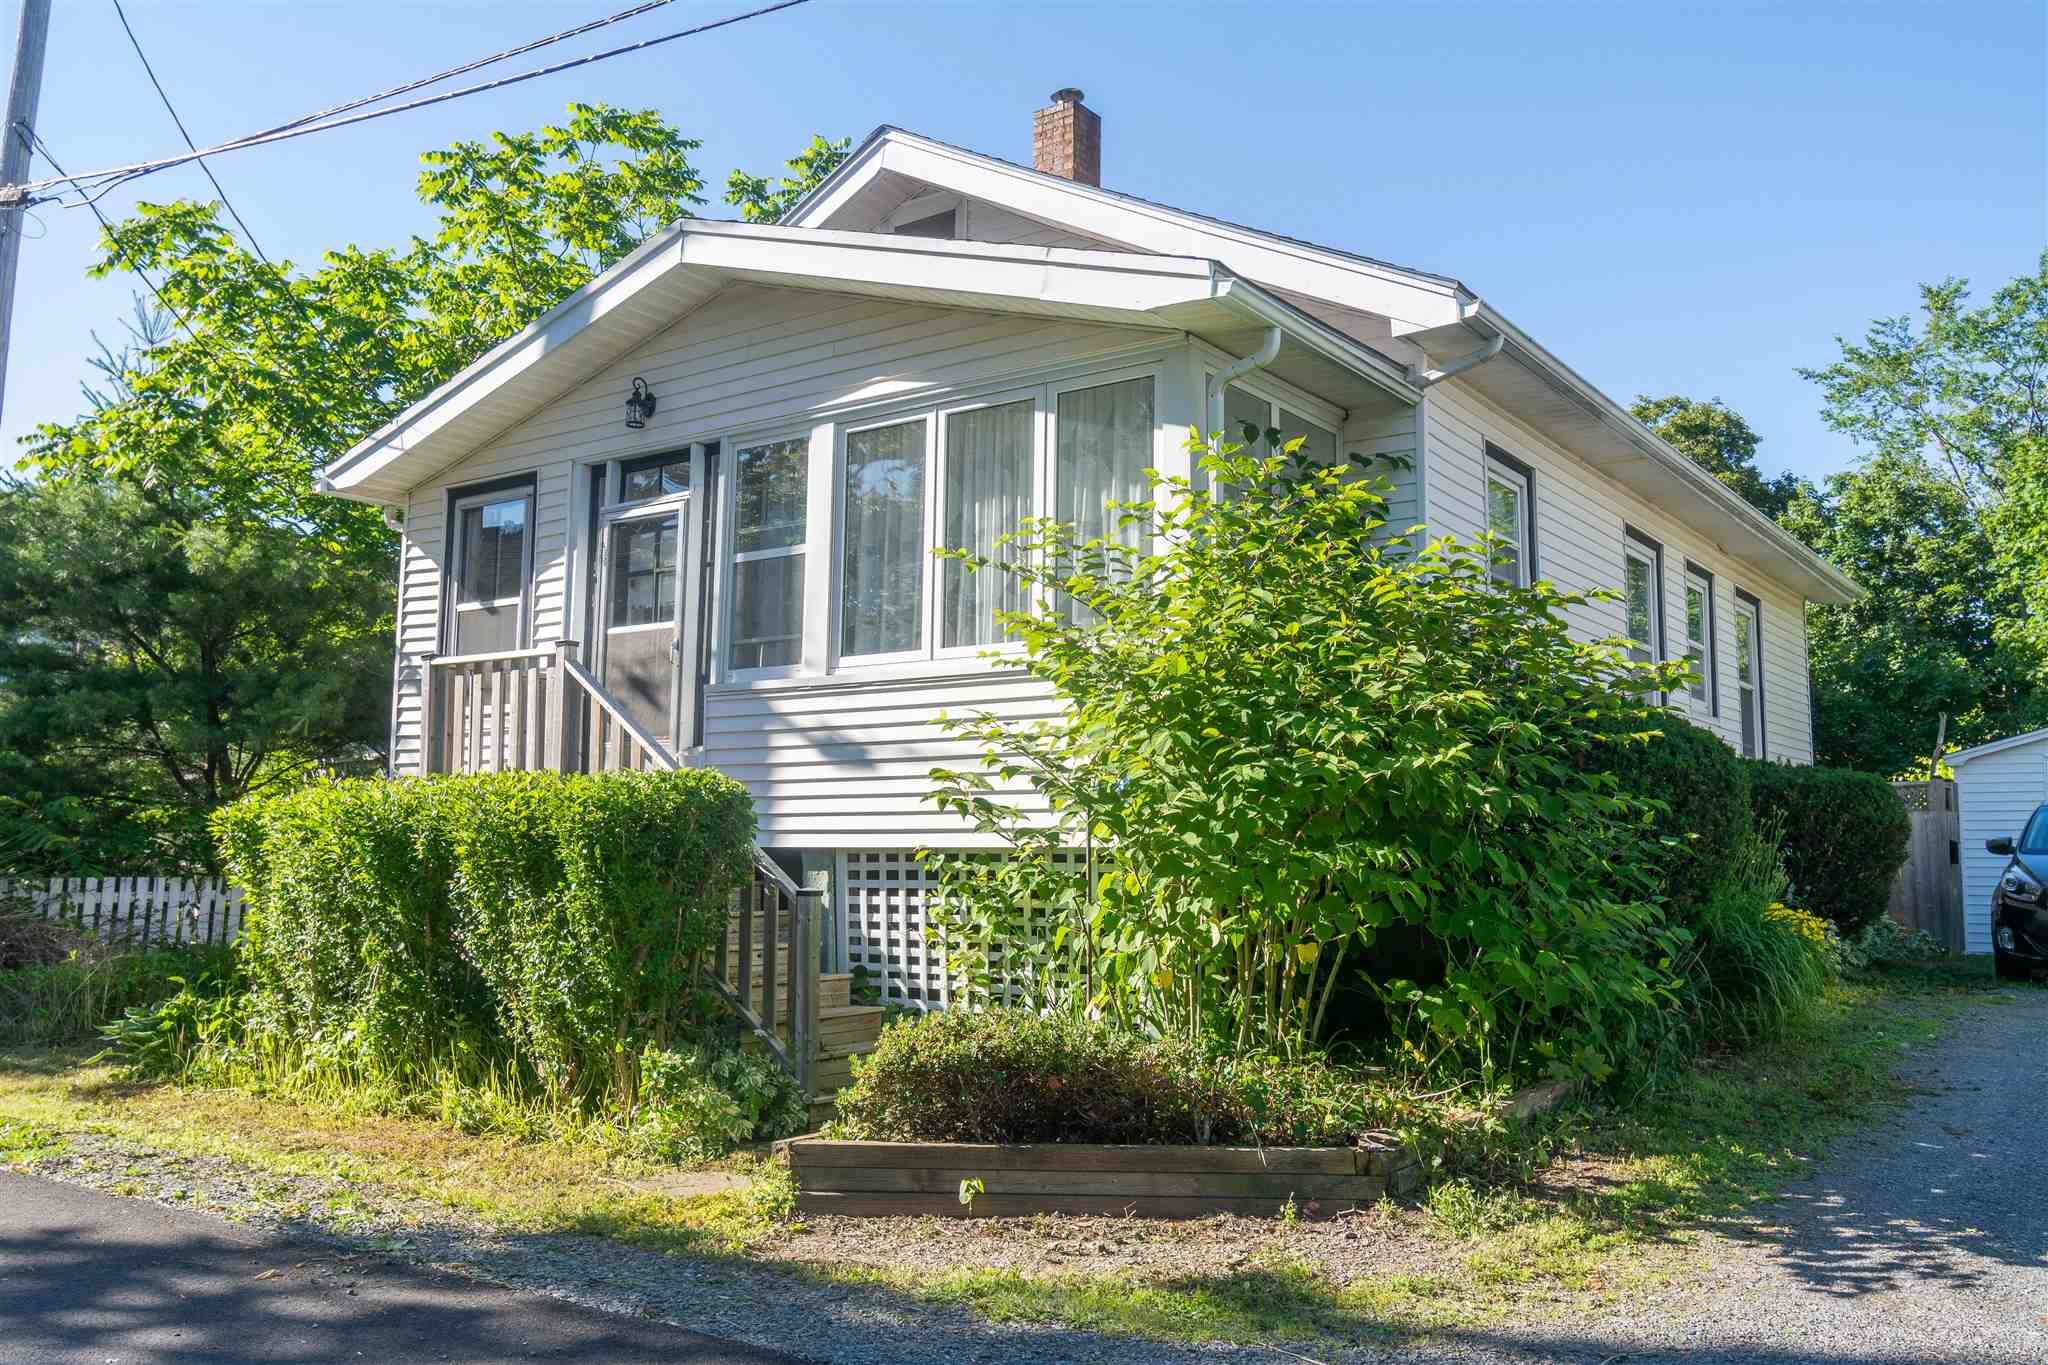 Main Photo: 171 Munroe Street in Windsor: 403-Hants County Residential for sale (Annapolis Valley)  : MLS®# 202116941